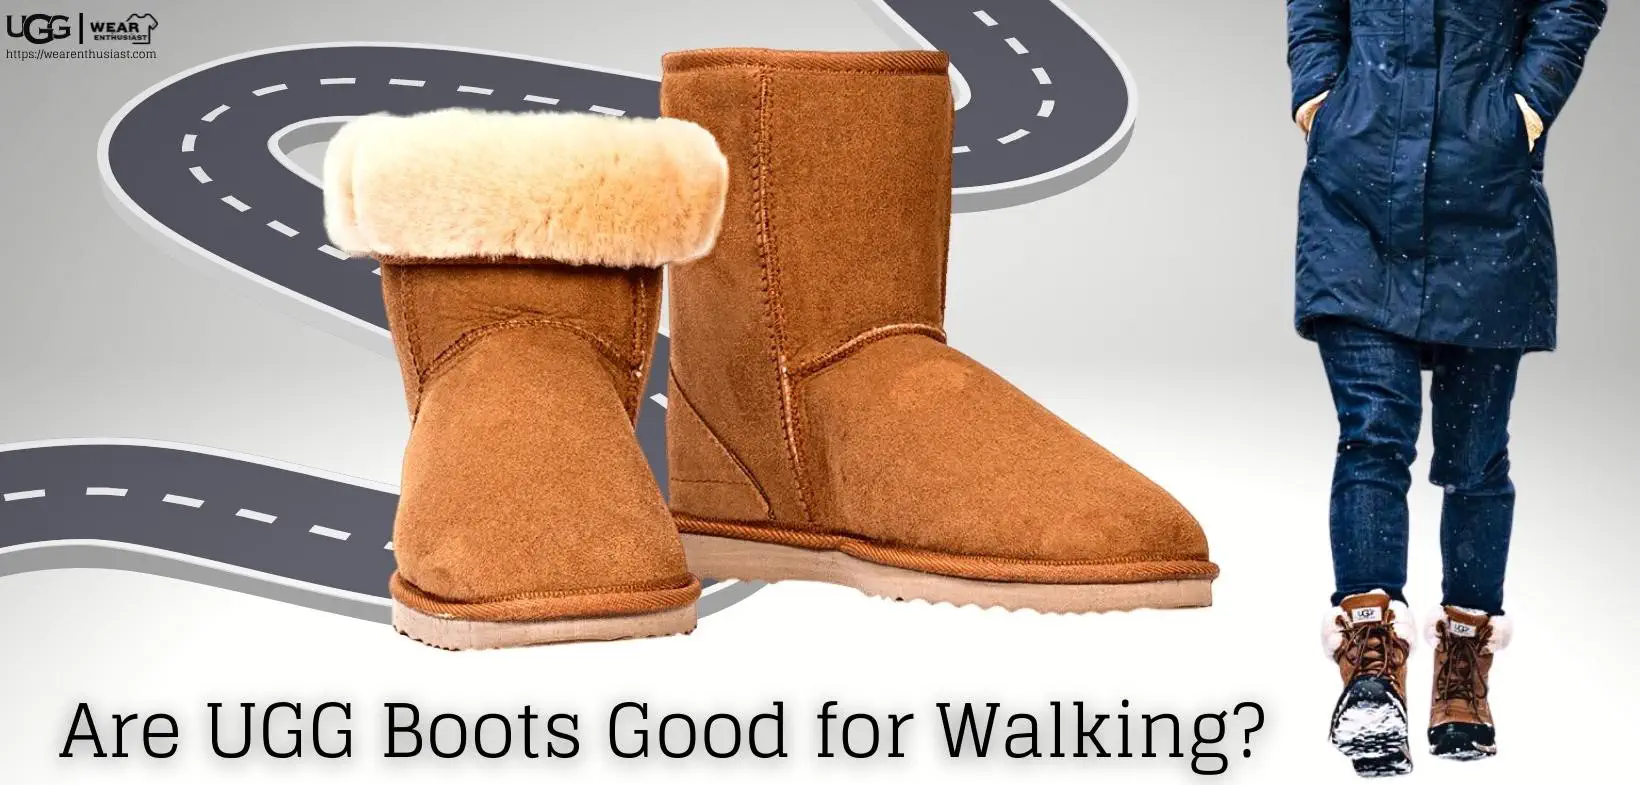 Are UGG Boots Good for Walking?